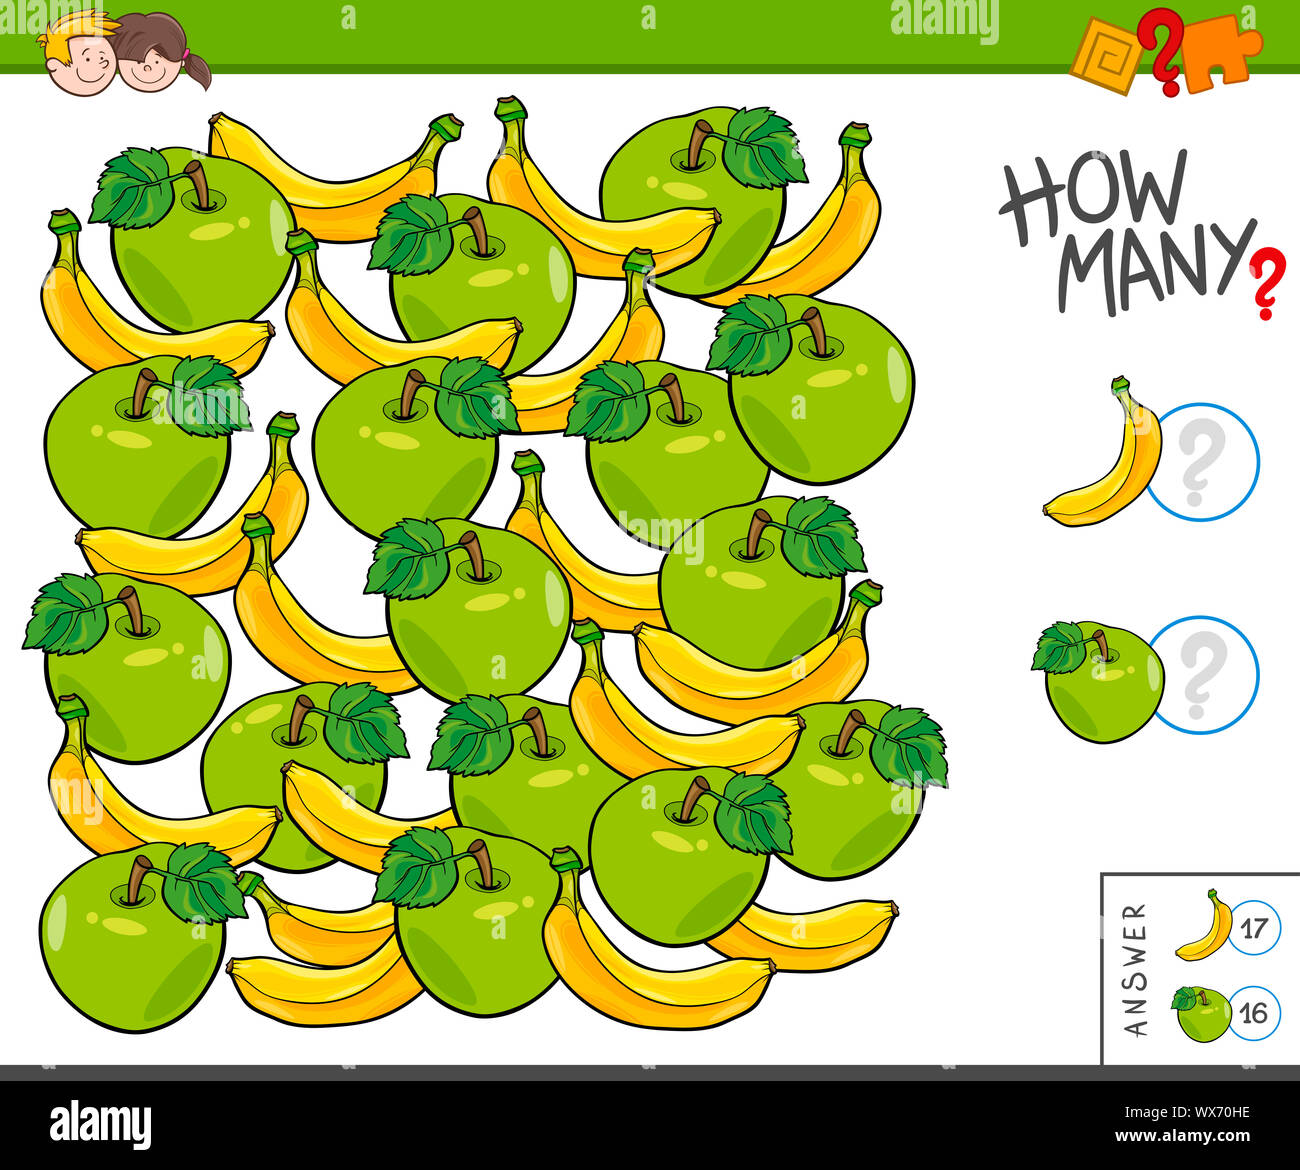 how many educational counting game for children Stock Photo